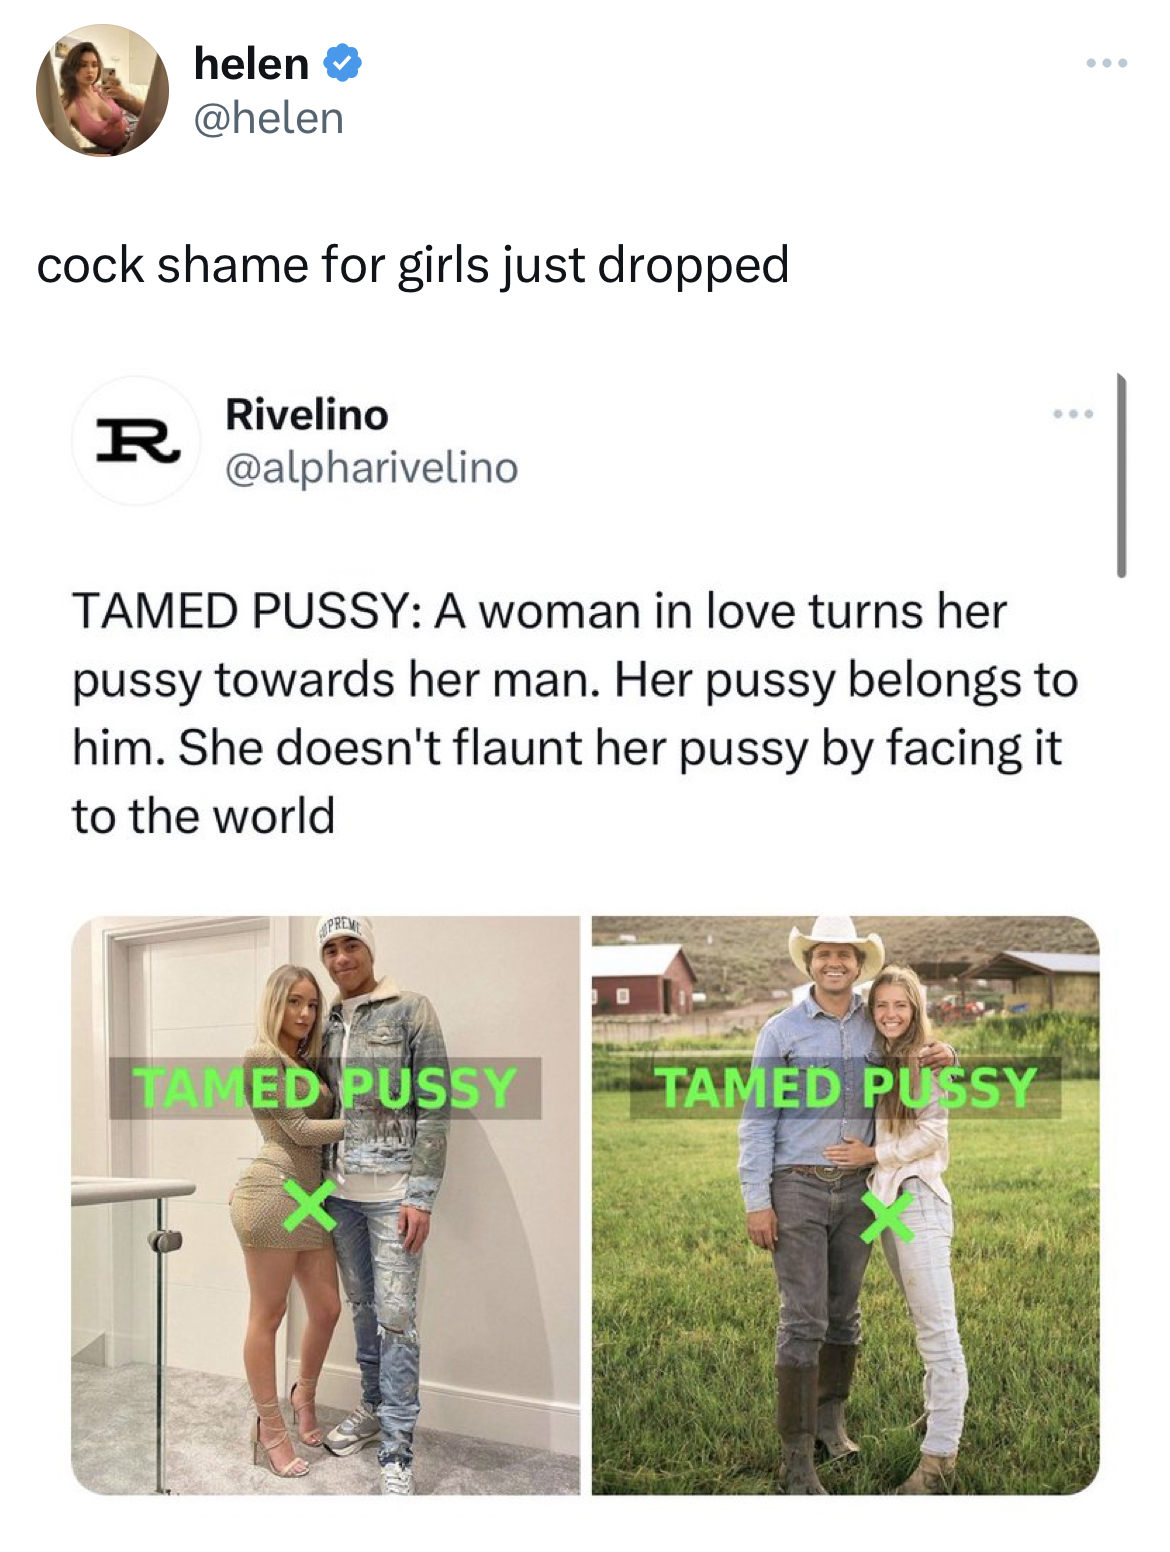 savage tweets - human behavior - helen cock shame for girls just dropped R Rivelino Tamed Pussy A woman in love turns her pussy towards her man. Her pussy belongs to him. She doesn't flaunt her pussy by facing it to the world Tamed Pussy Tamed Pussy www